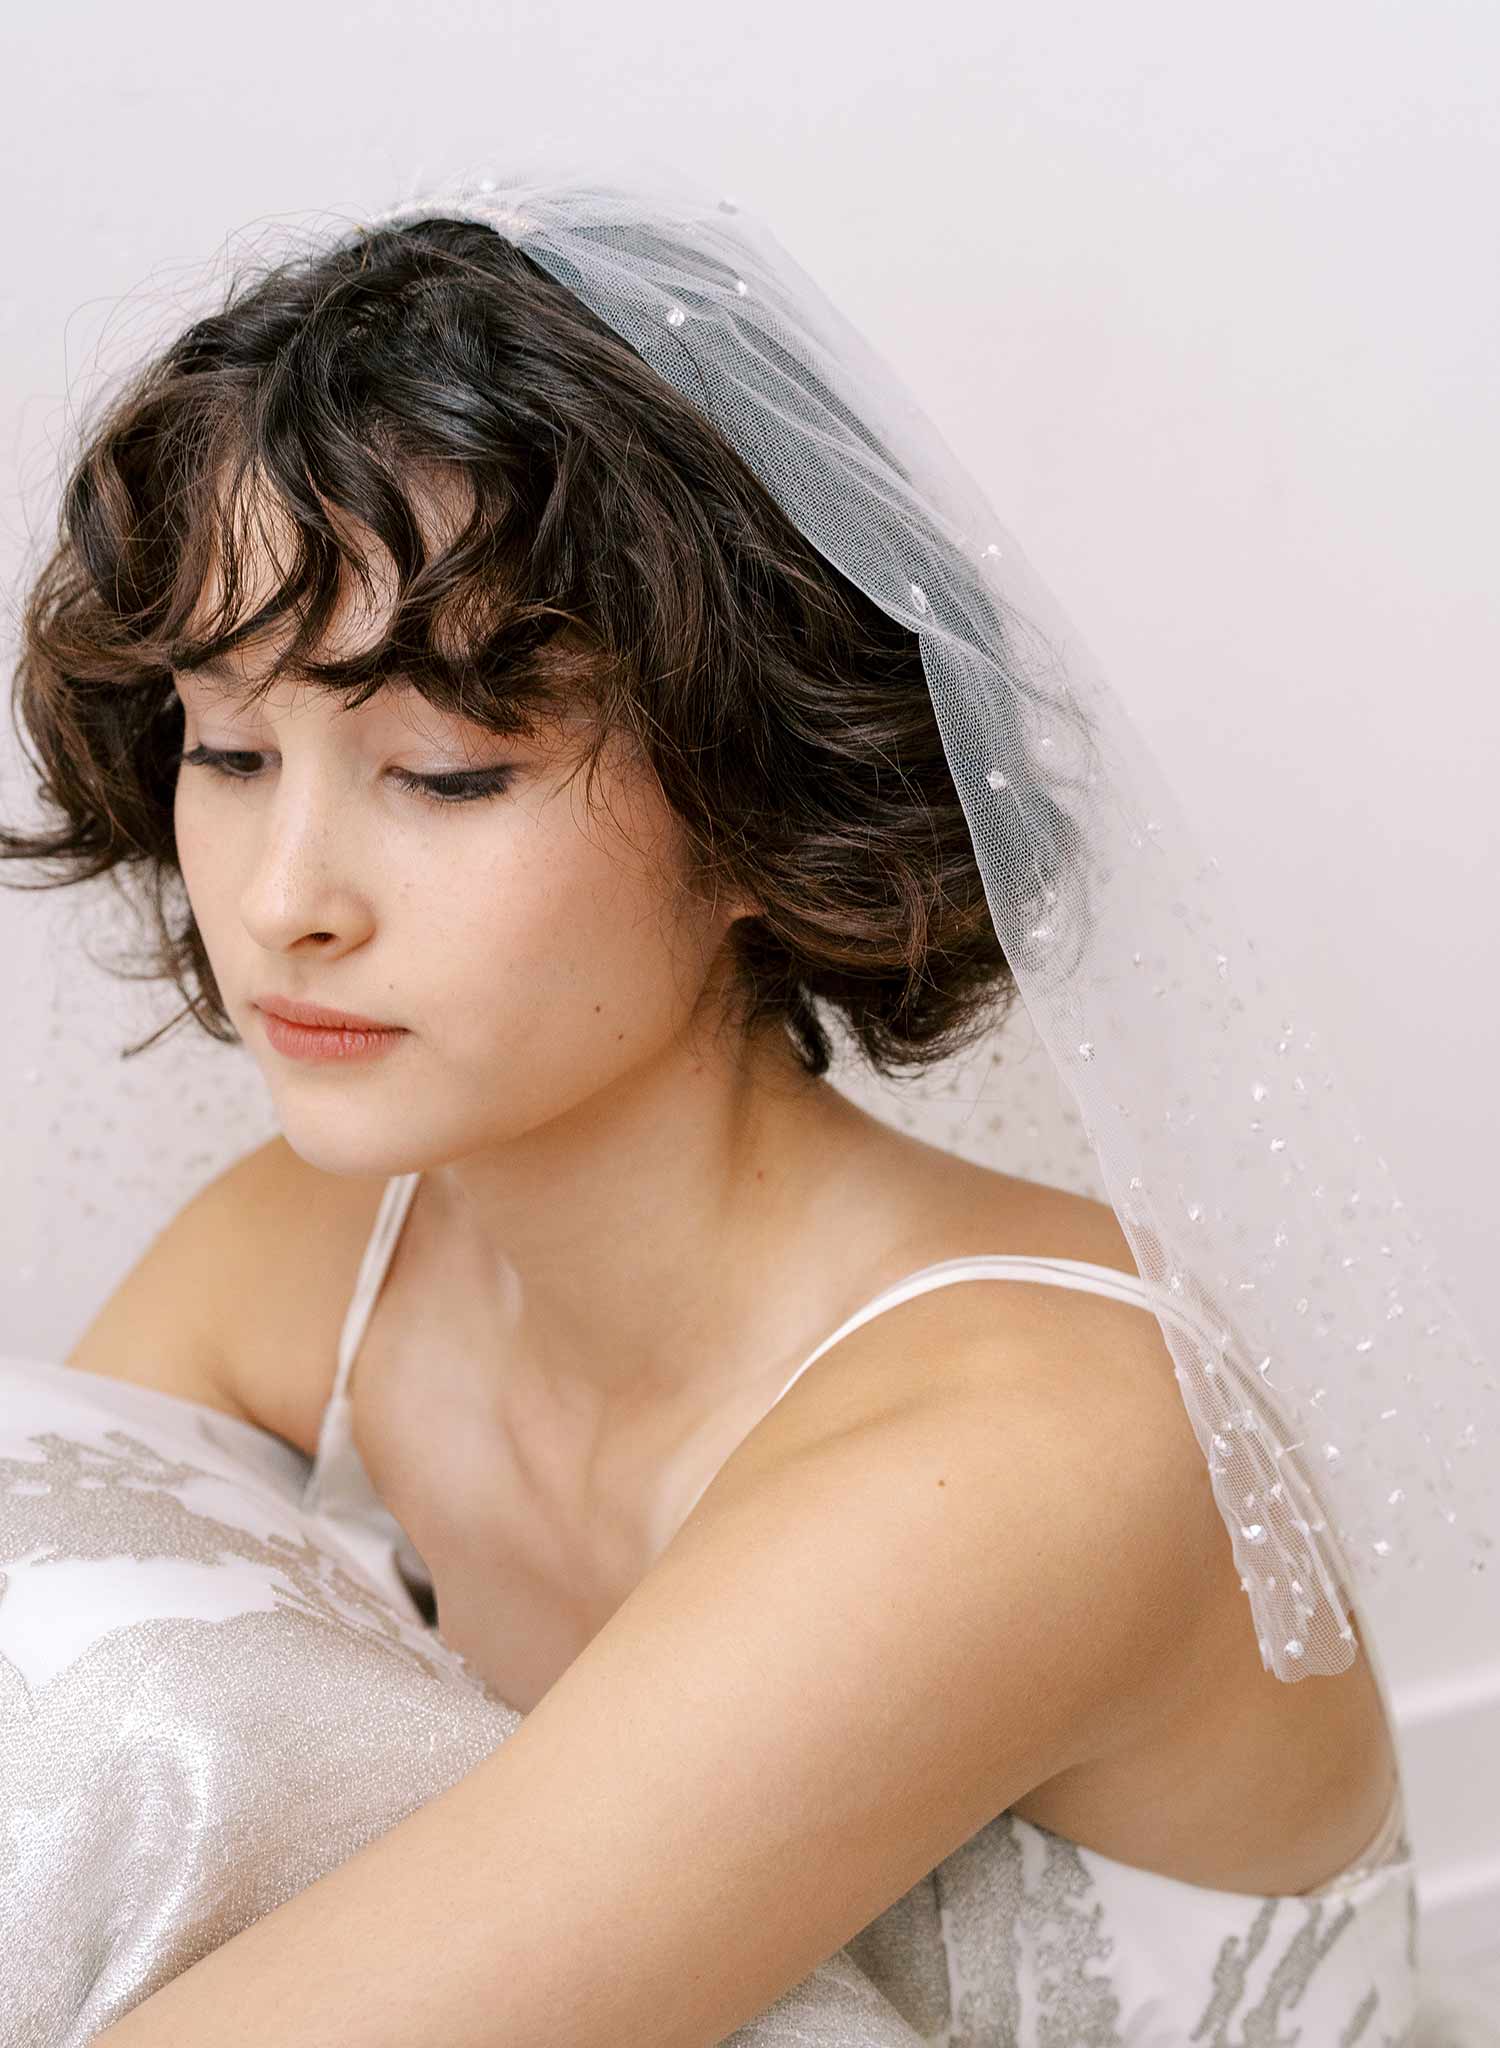 How to wear a wedding veil with short hair (or NO HAIR